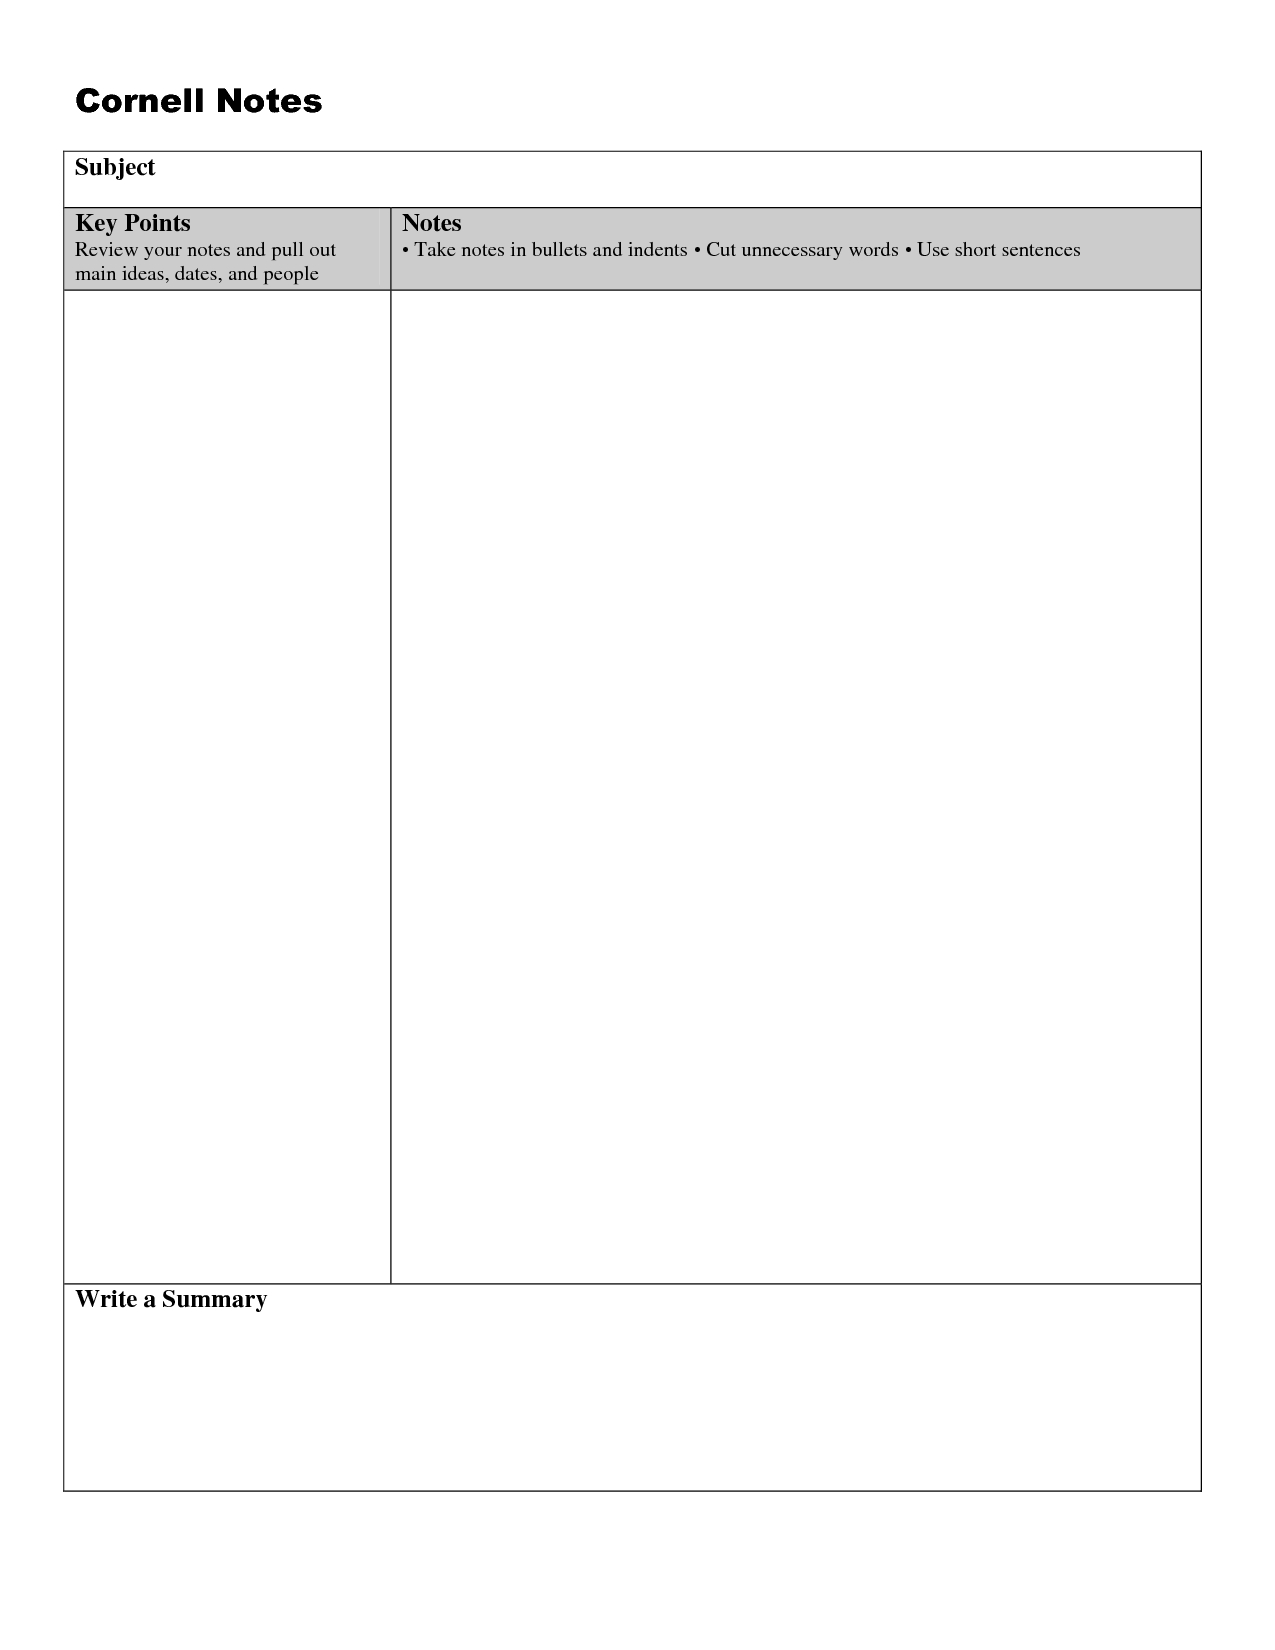 005 Note Taking Template Word Ideas Unforgettable Cornell Intended For Note Taking Template Word